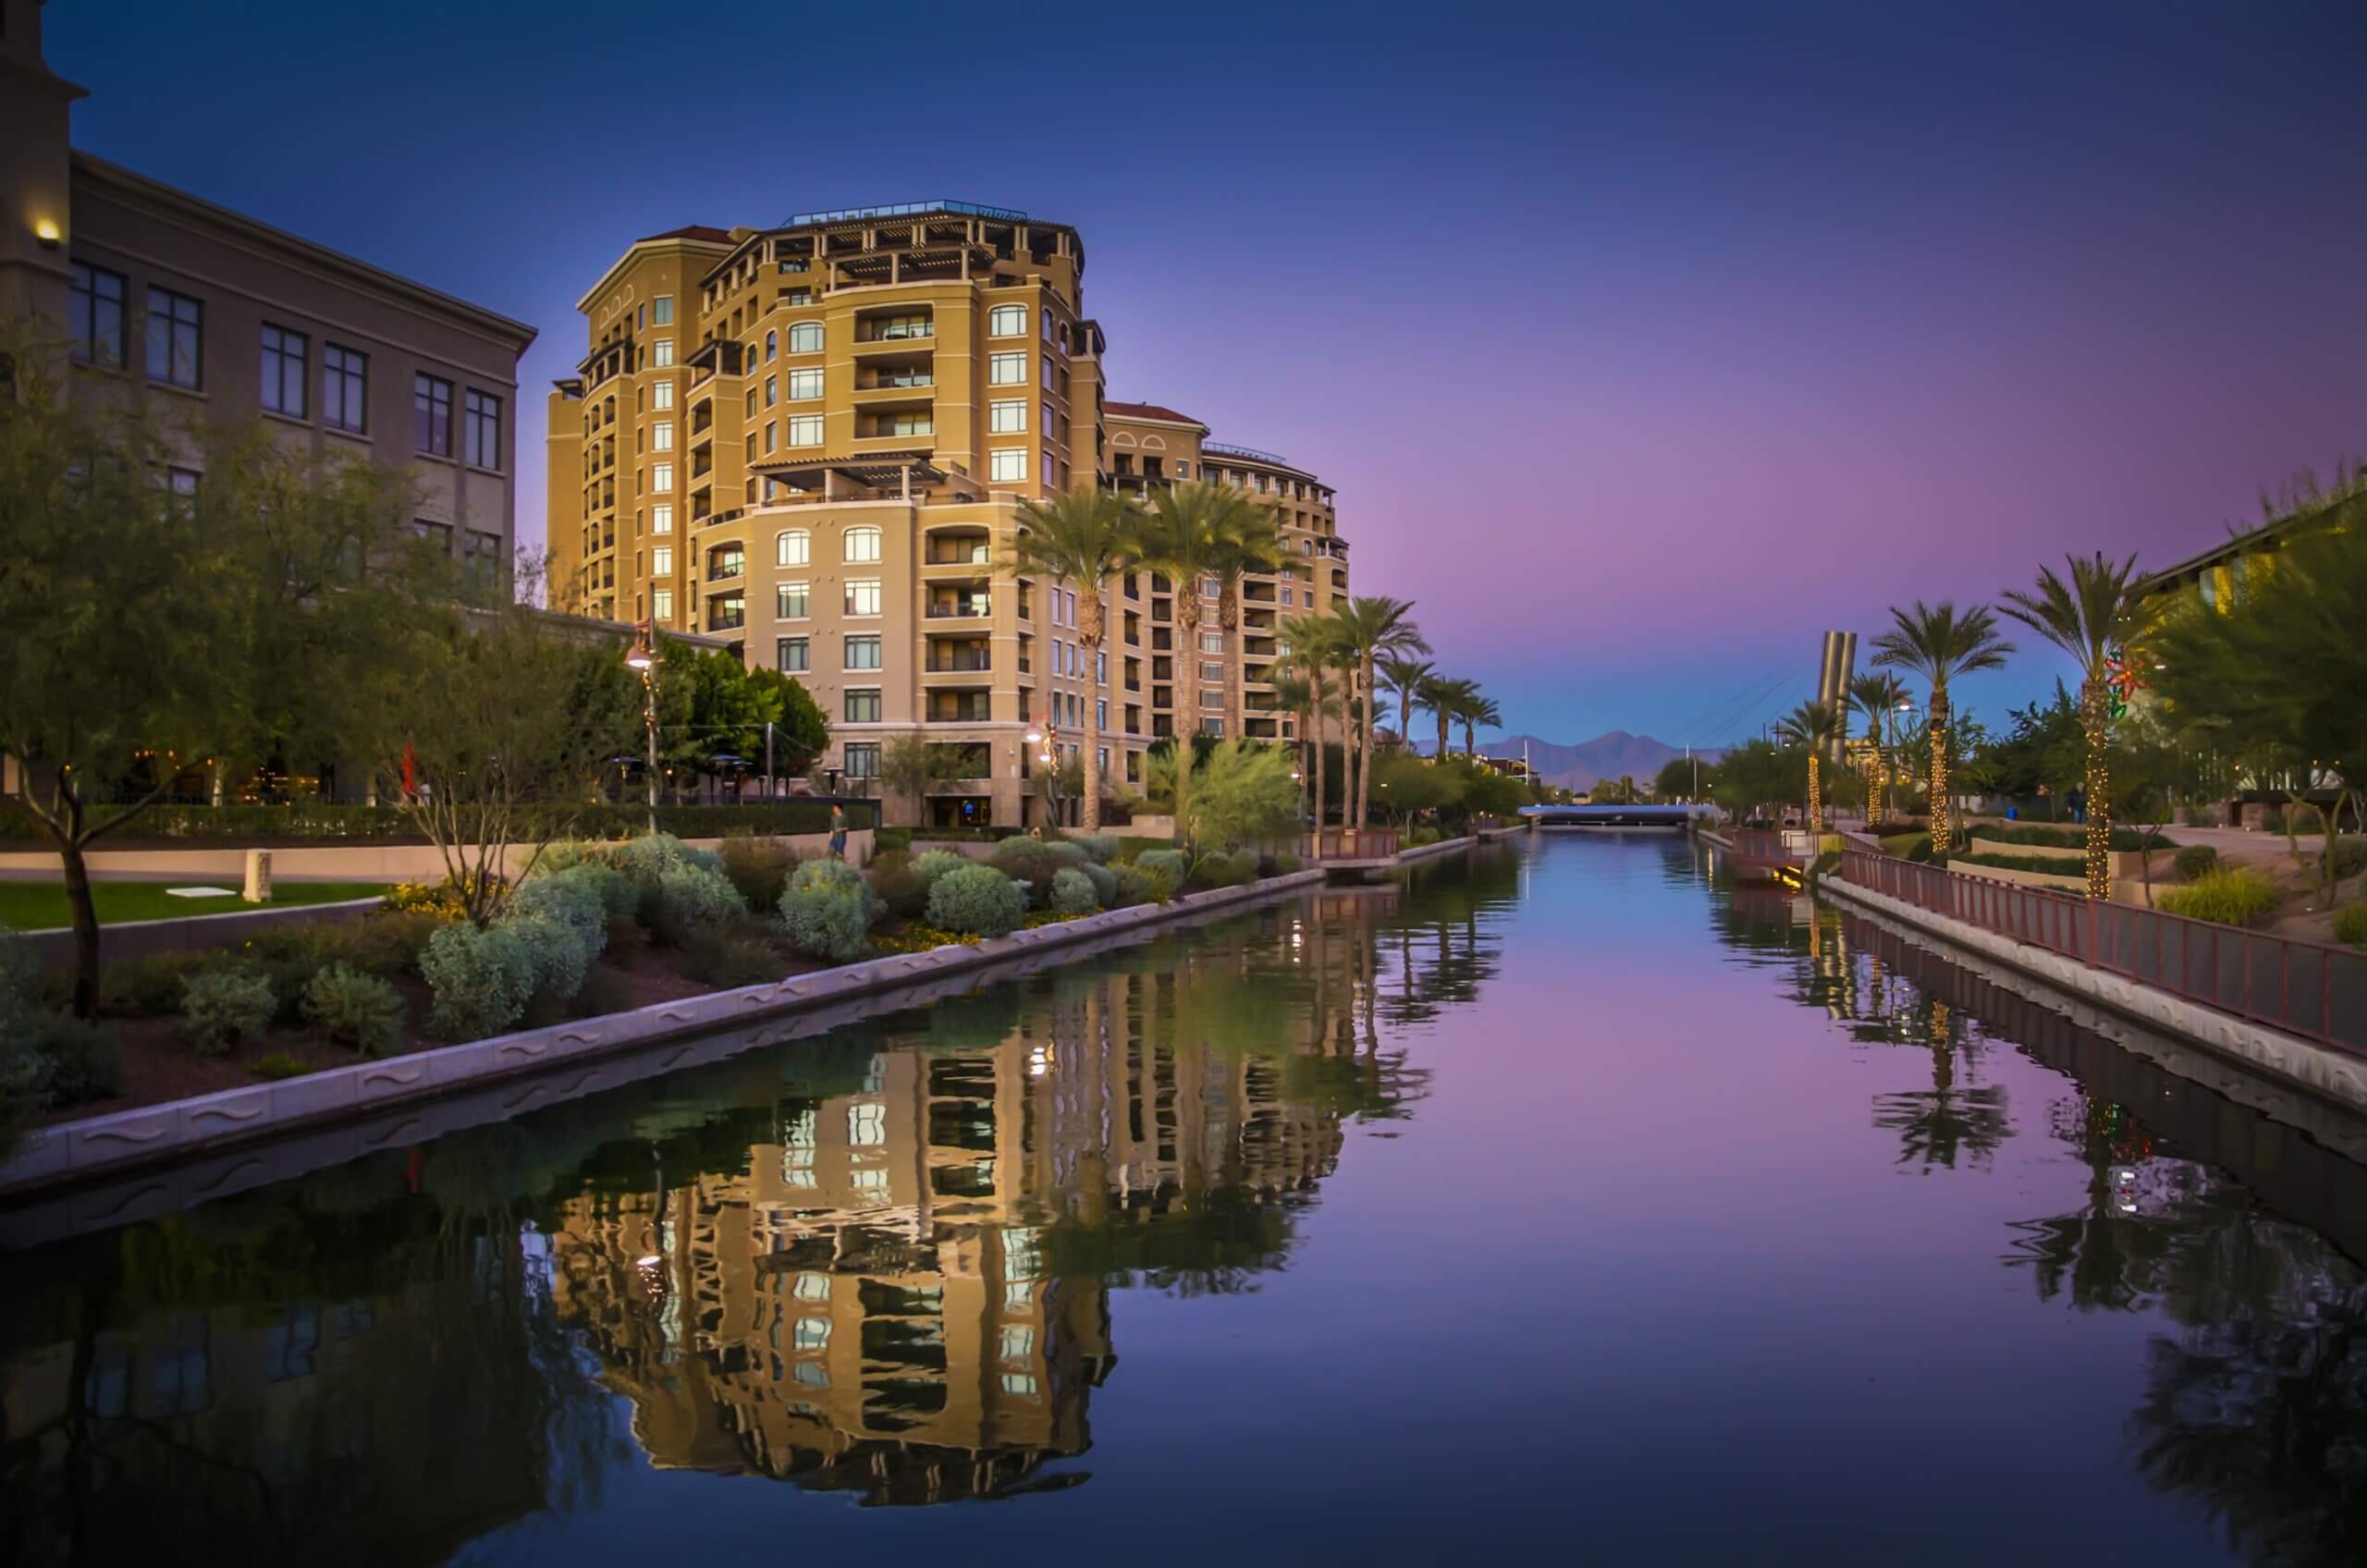 Scottsdale An Affluent City With A Little Something For Everyone!